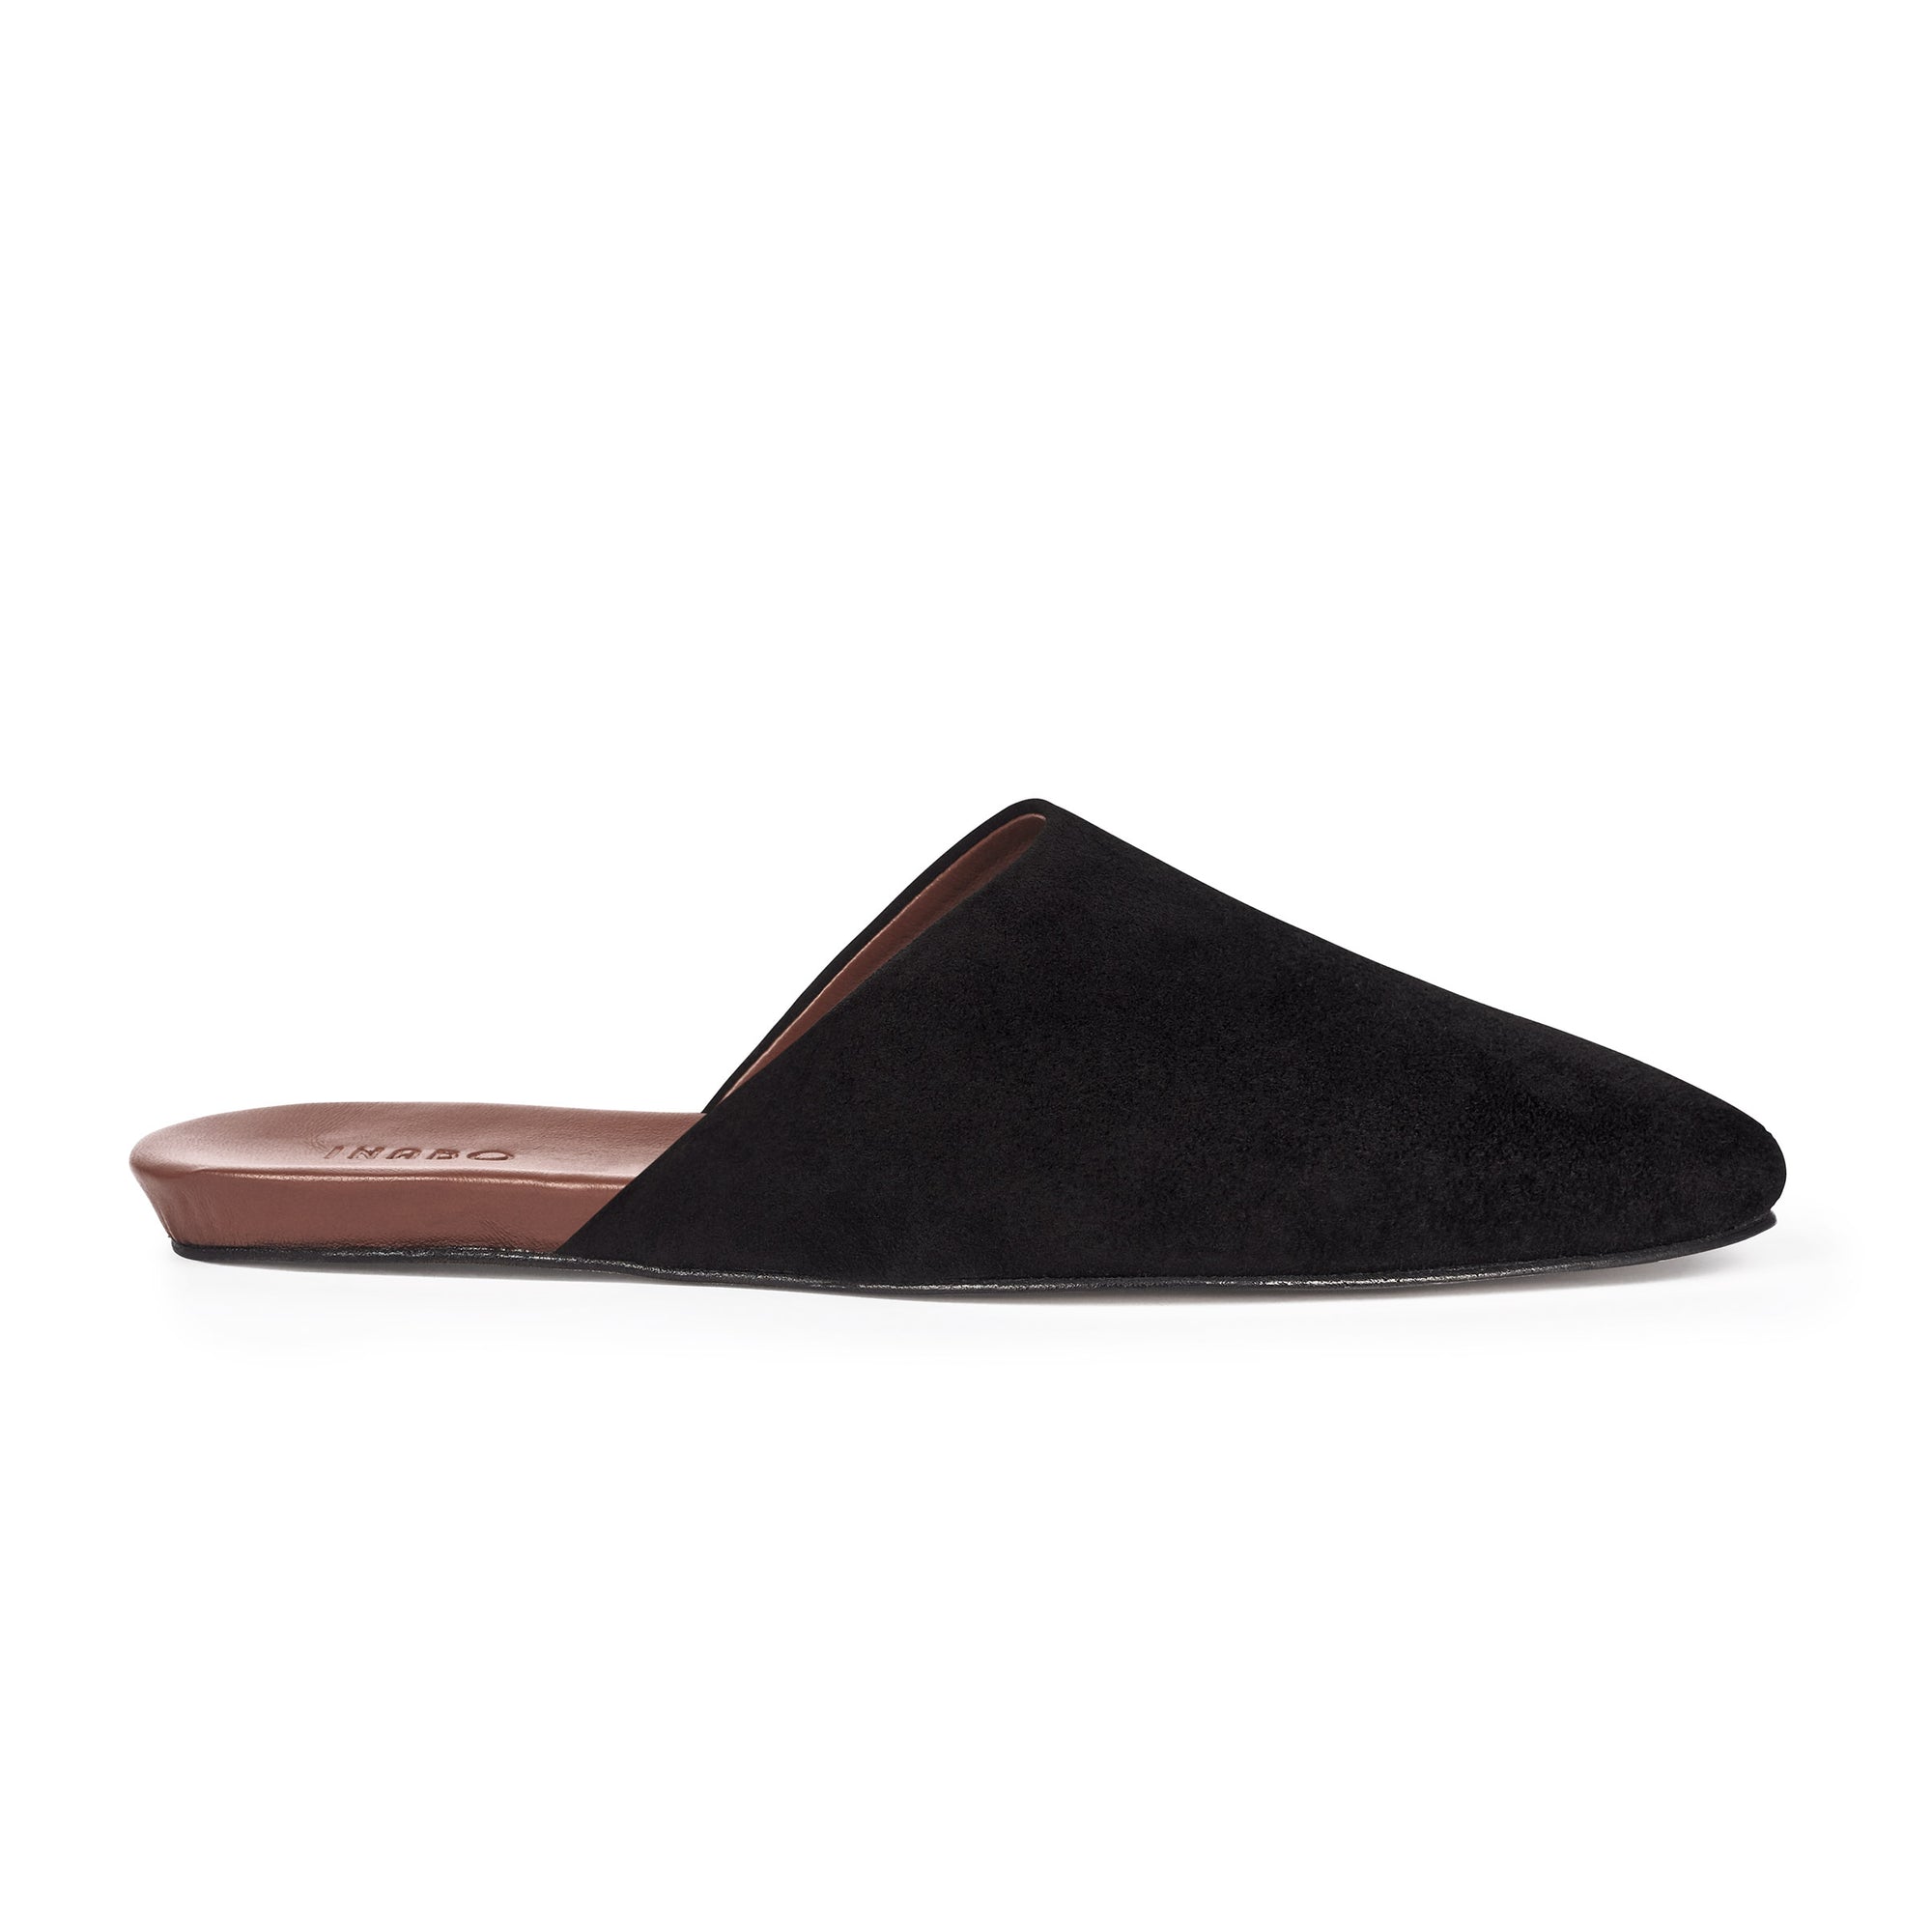 Inabo Women's Slider slipper in black suede and brown leather insole shown in profile